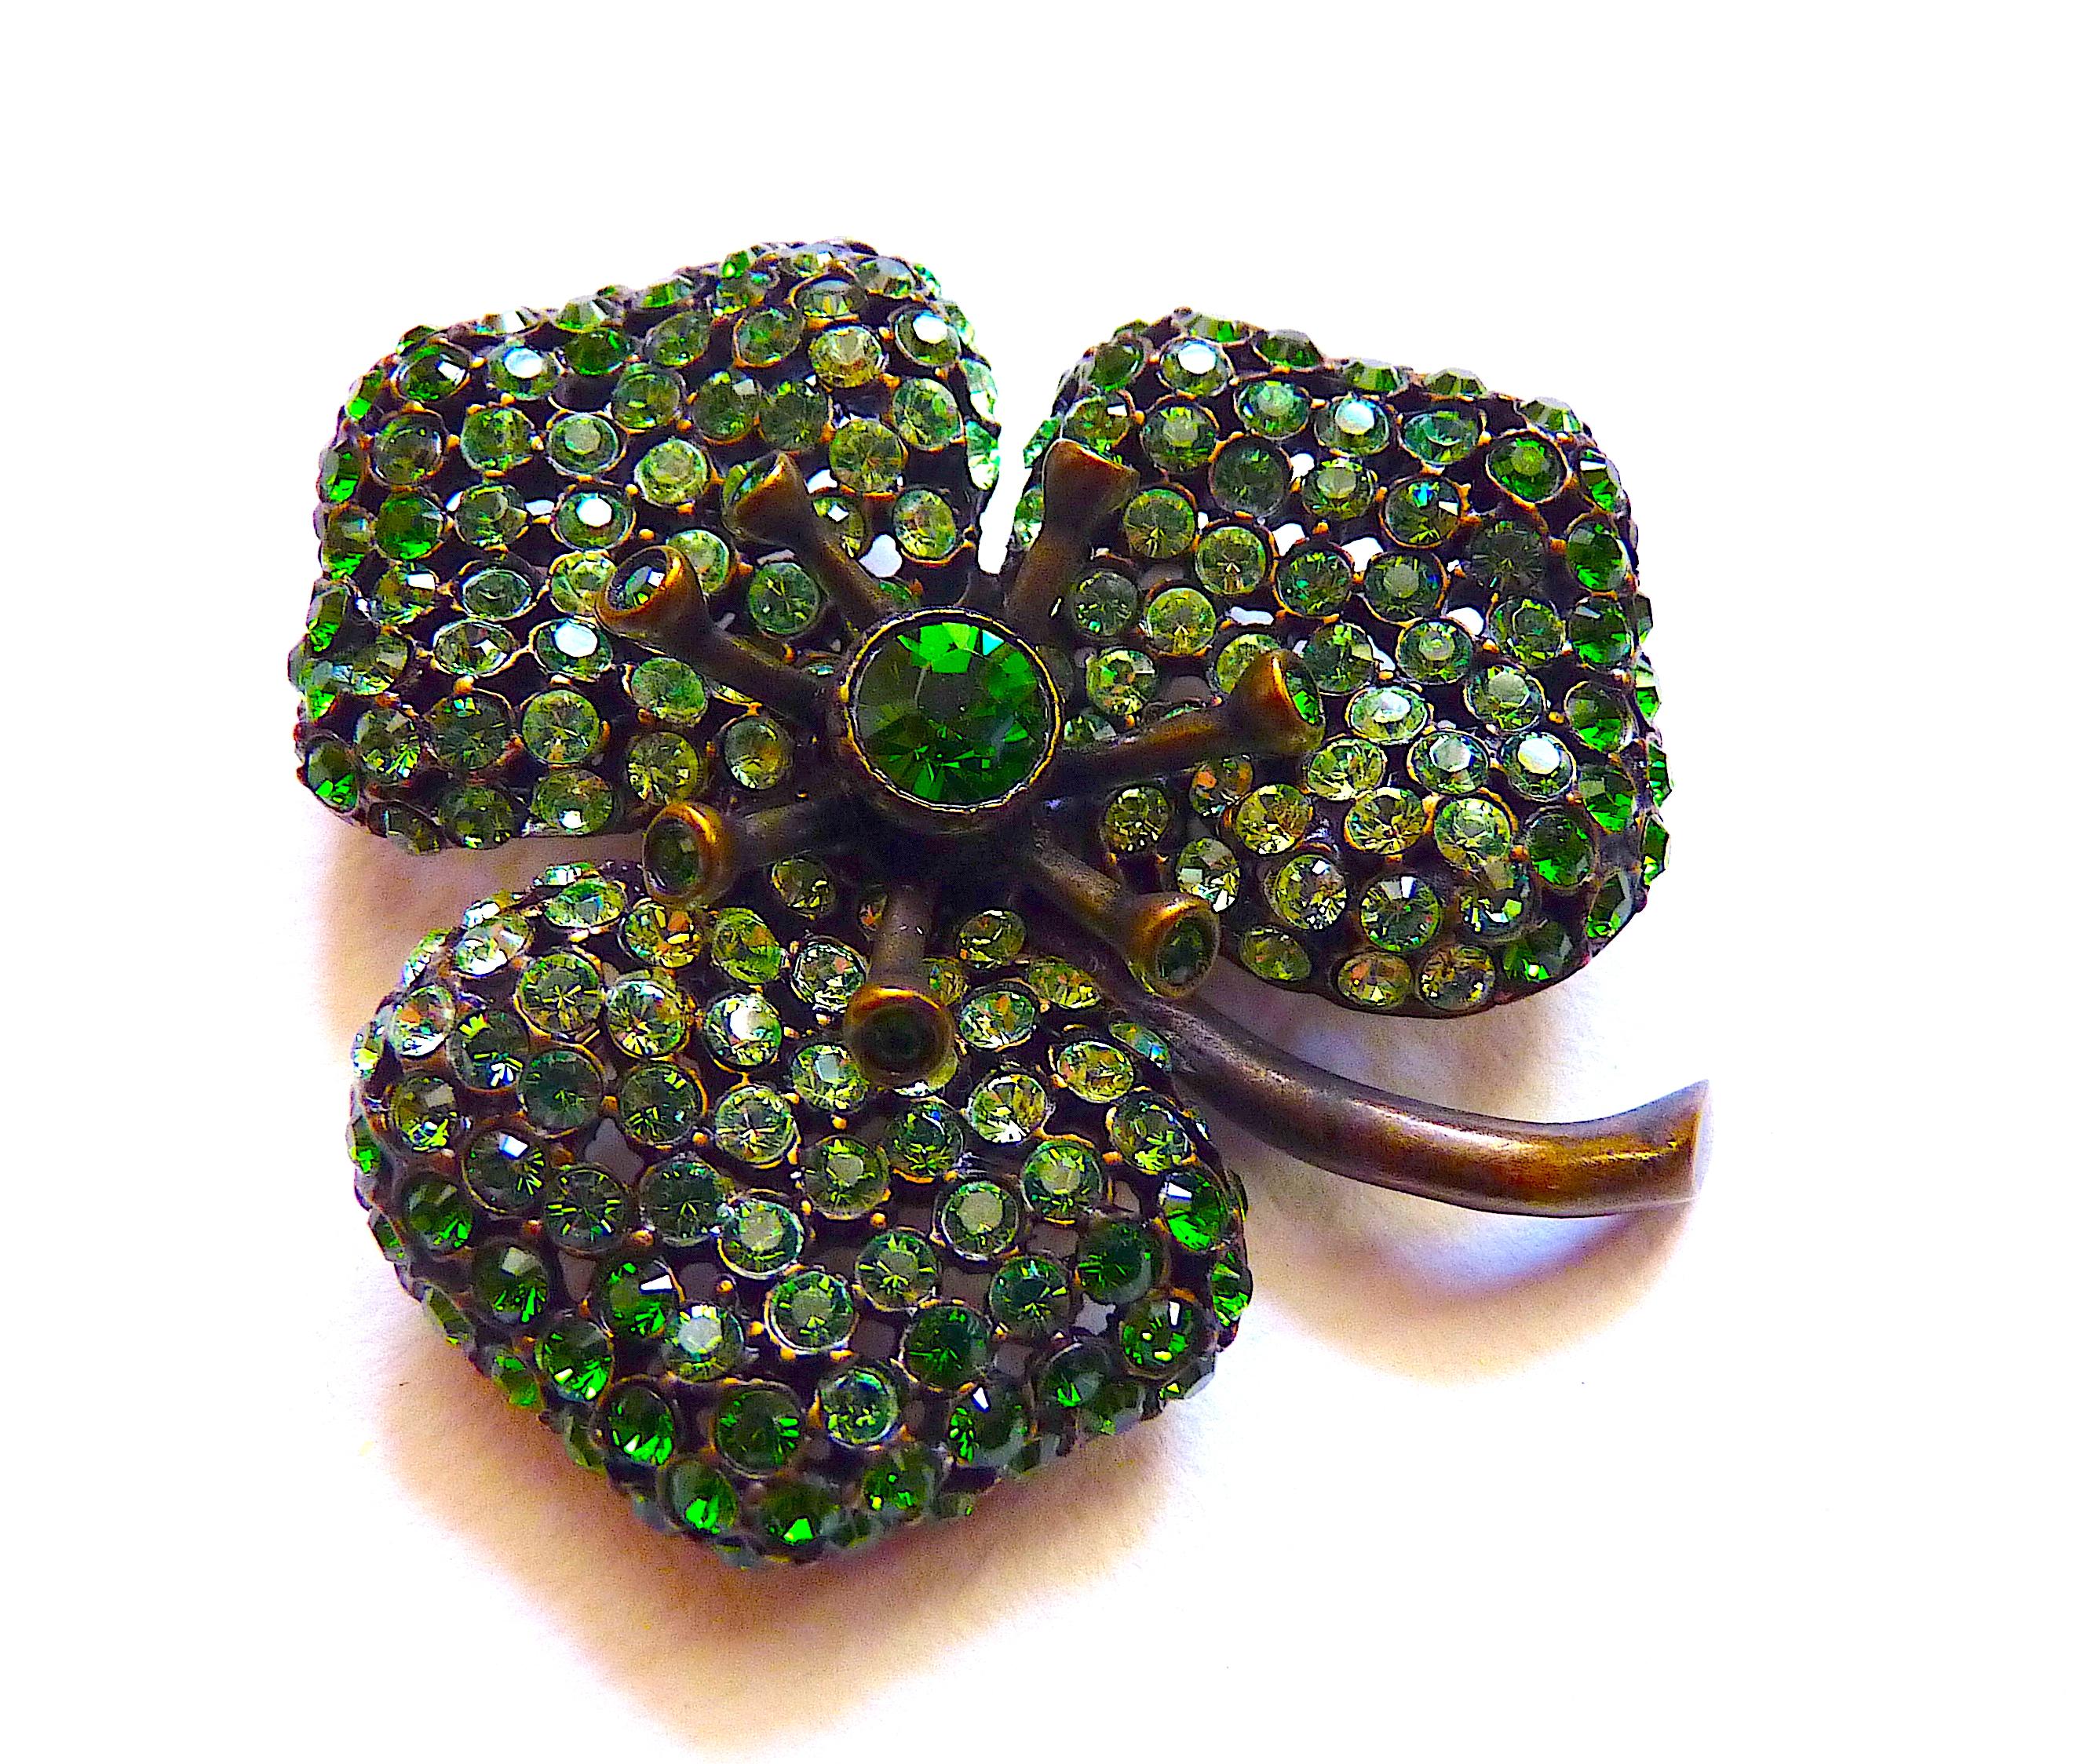 This is a Sonia Rykiel Clover Brooch made of brown patinated metal decorated with very shiny green glass stones, it is Vintage from the 1980s.

Signed SONIA RYKIEL at back of the brooch

CONDITION : Mint Condition ! This brooch seems unworn